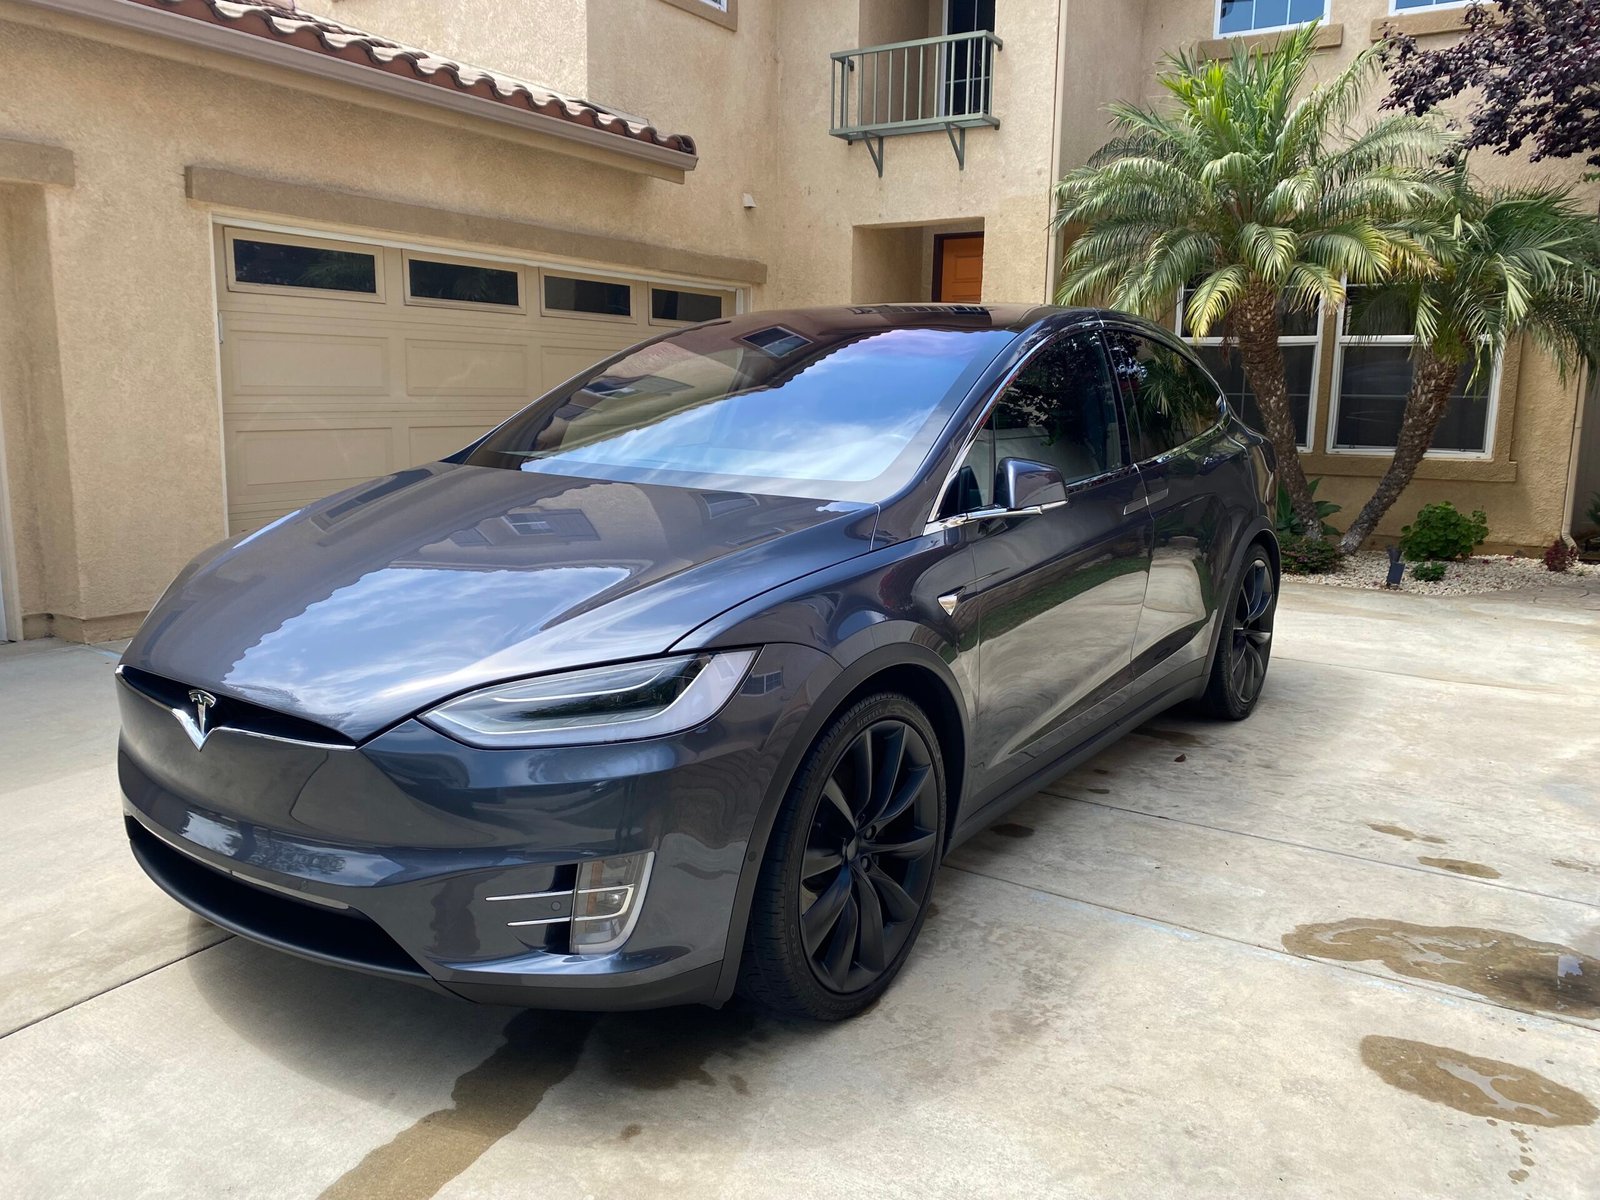 Dark gray Tesla sitting in driveway in front of a tan house